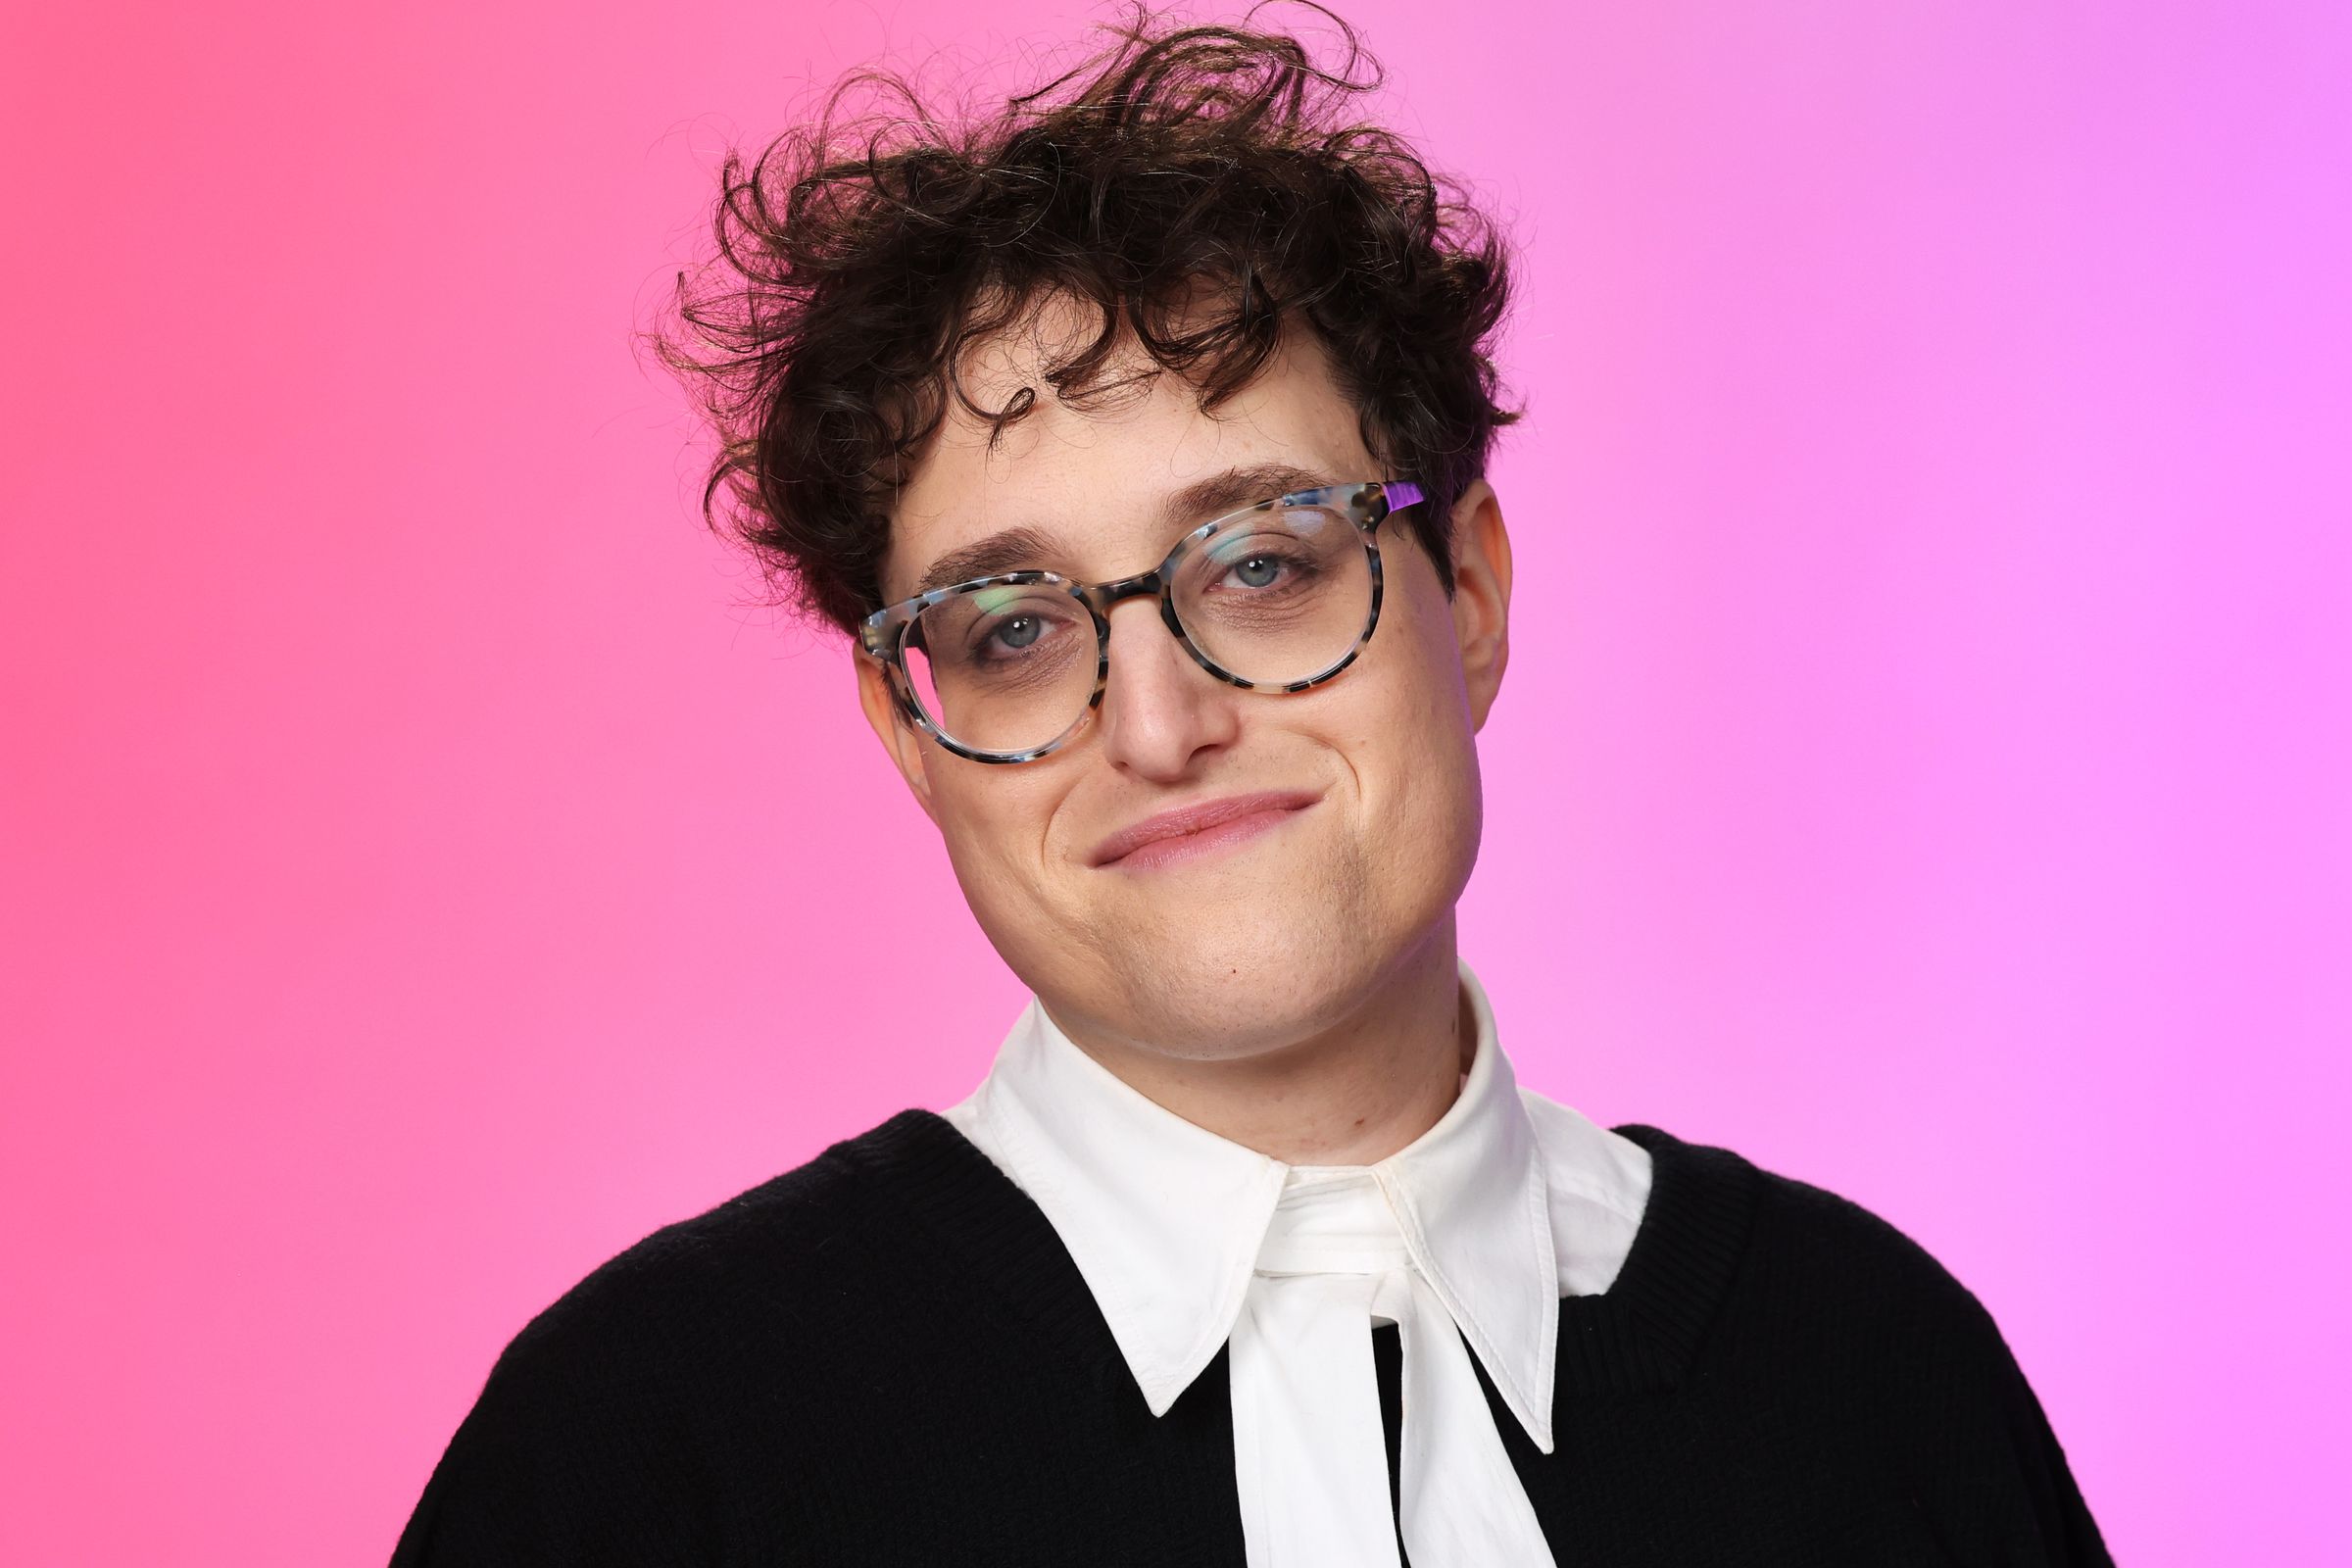 A close-up portrait shot of a nonbinary person wearing glasses, and a frock that resembles that of a court judge.